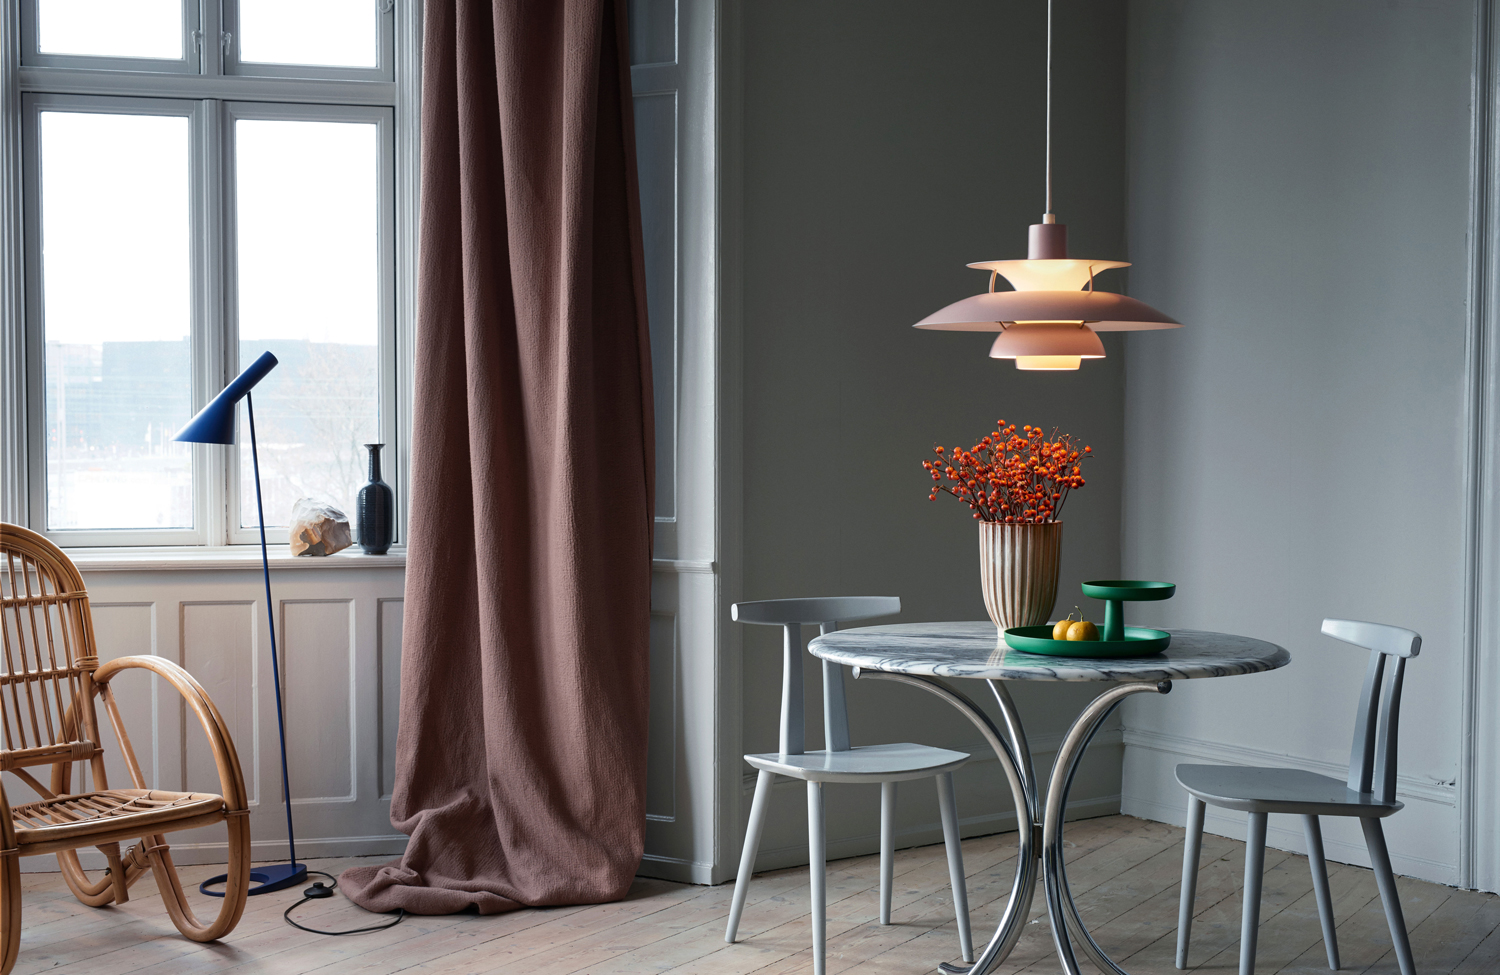 Louis Poulsen – Made in Denmark and Shaped by Light